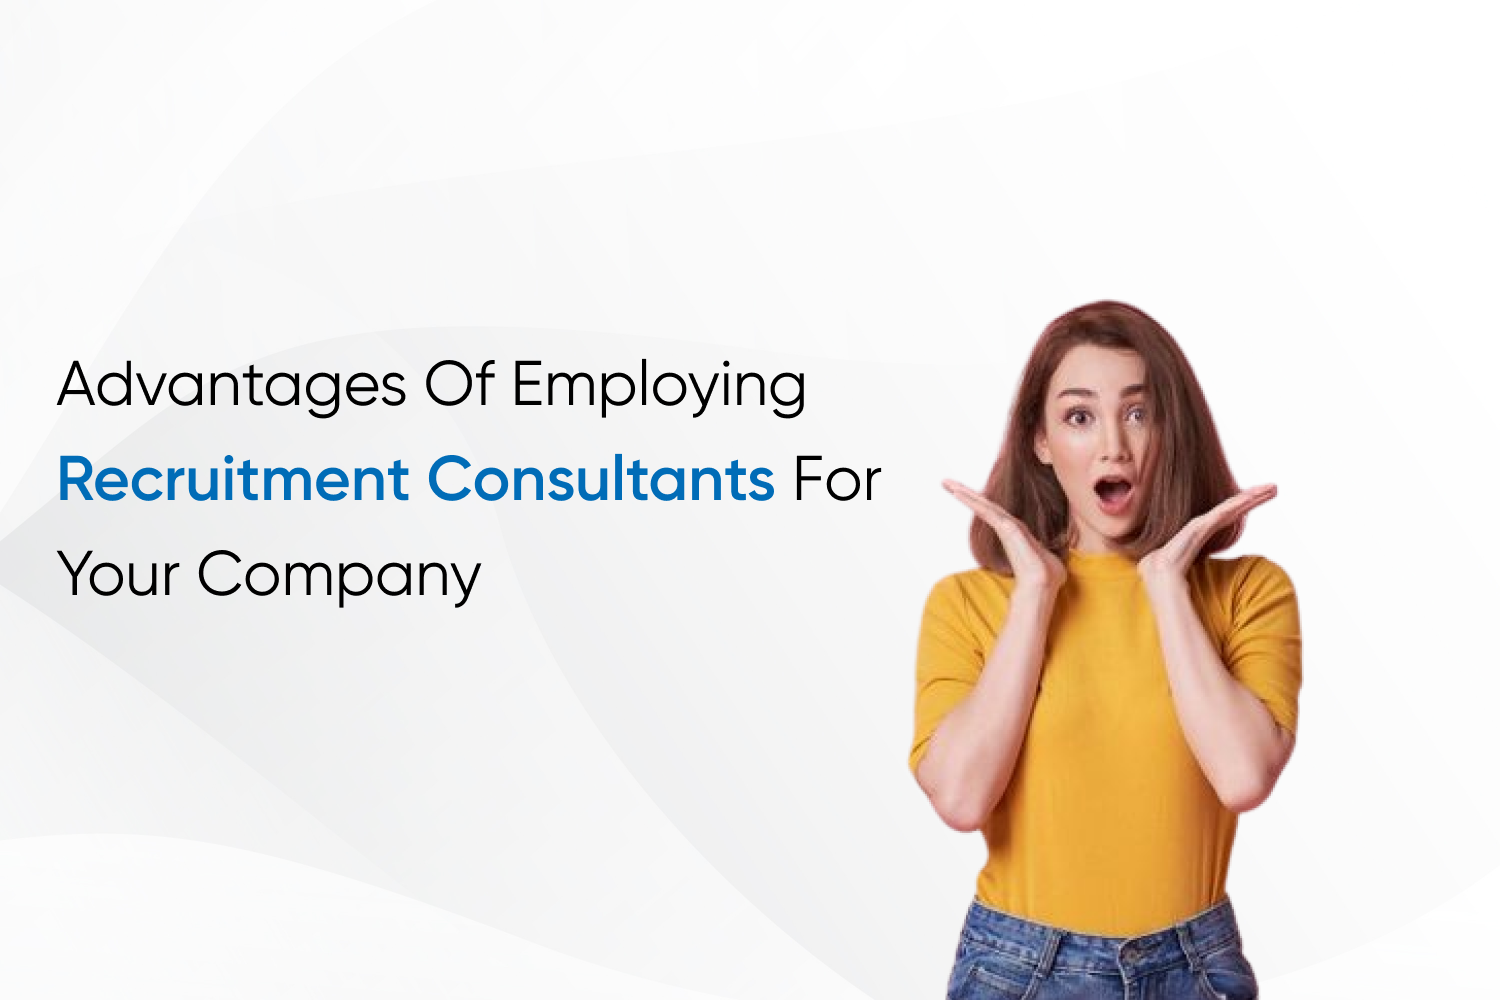 Advantages Of Employing Recruitment Consultants For Your Company